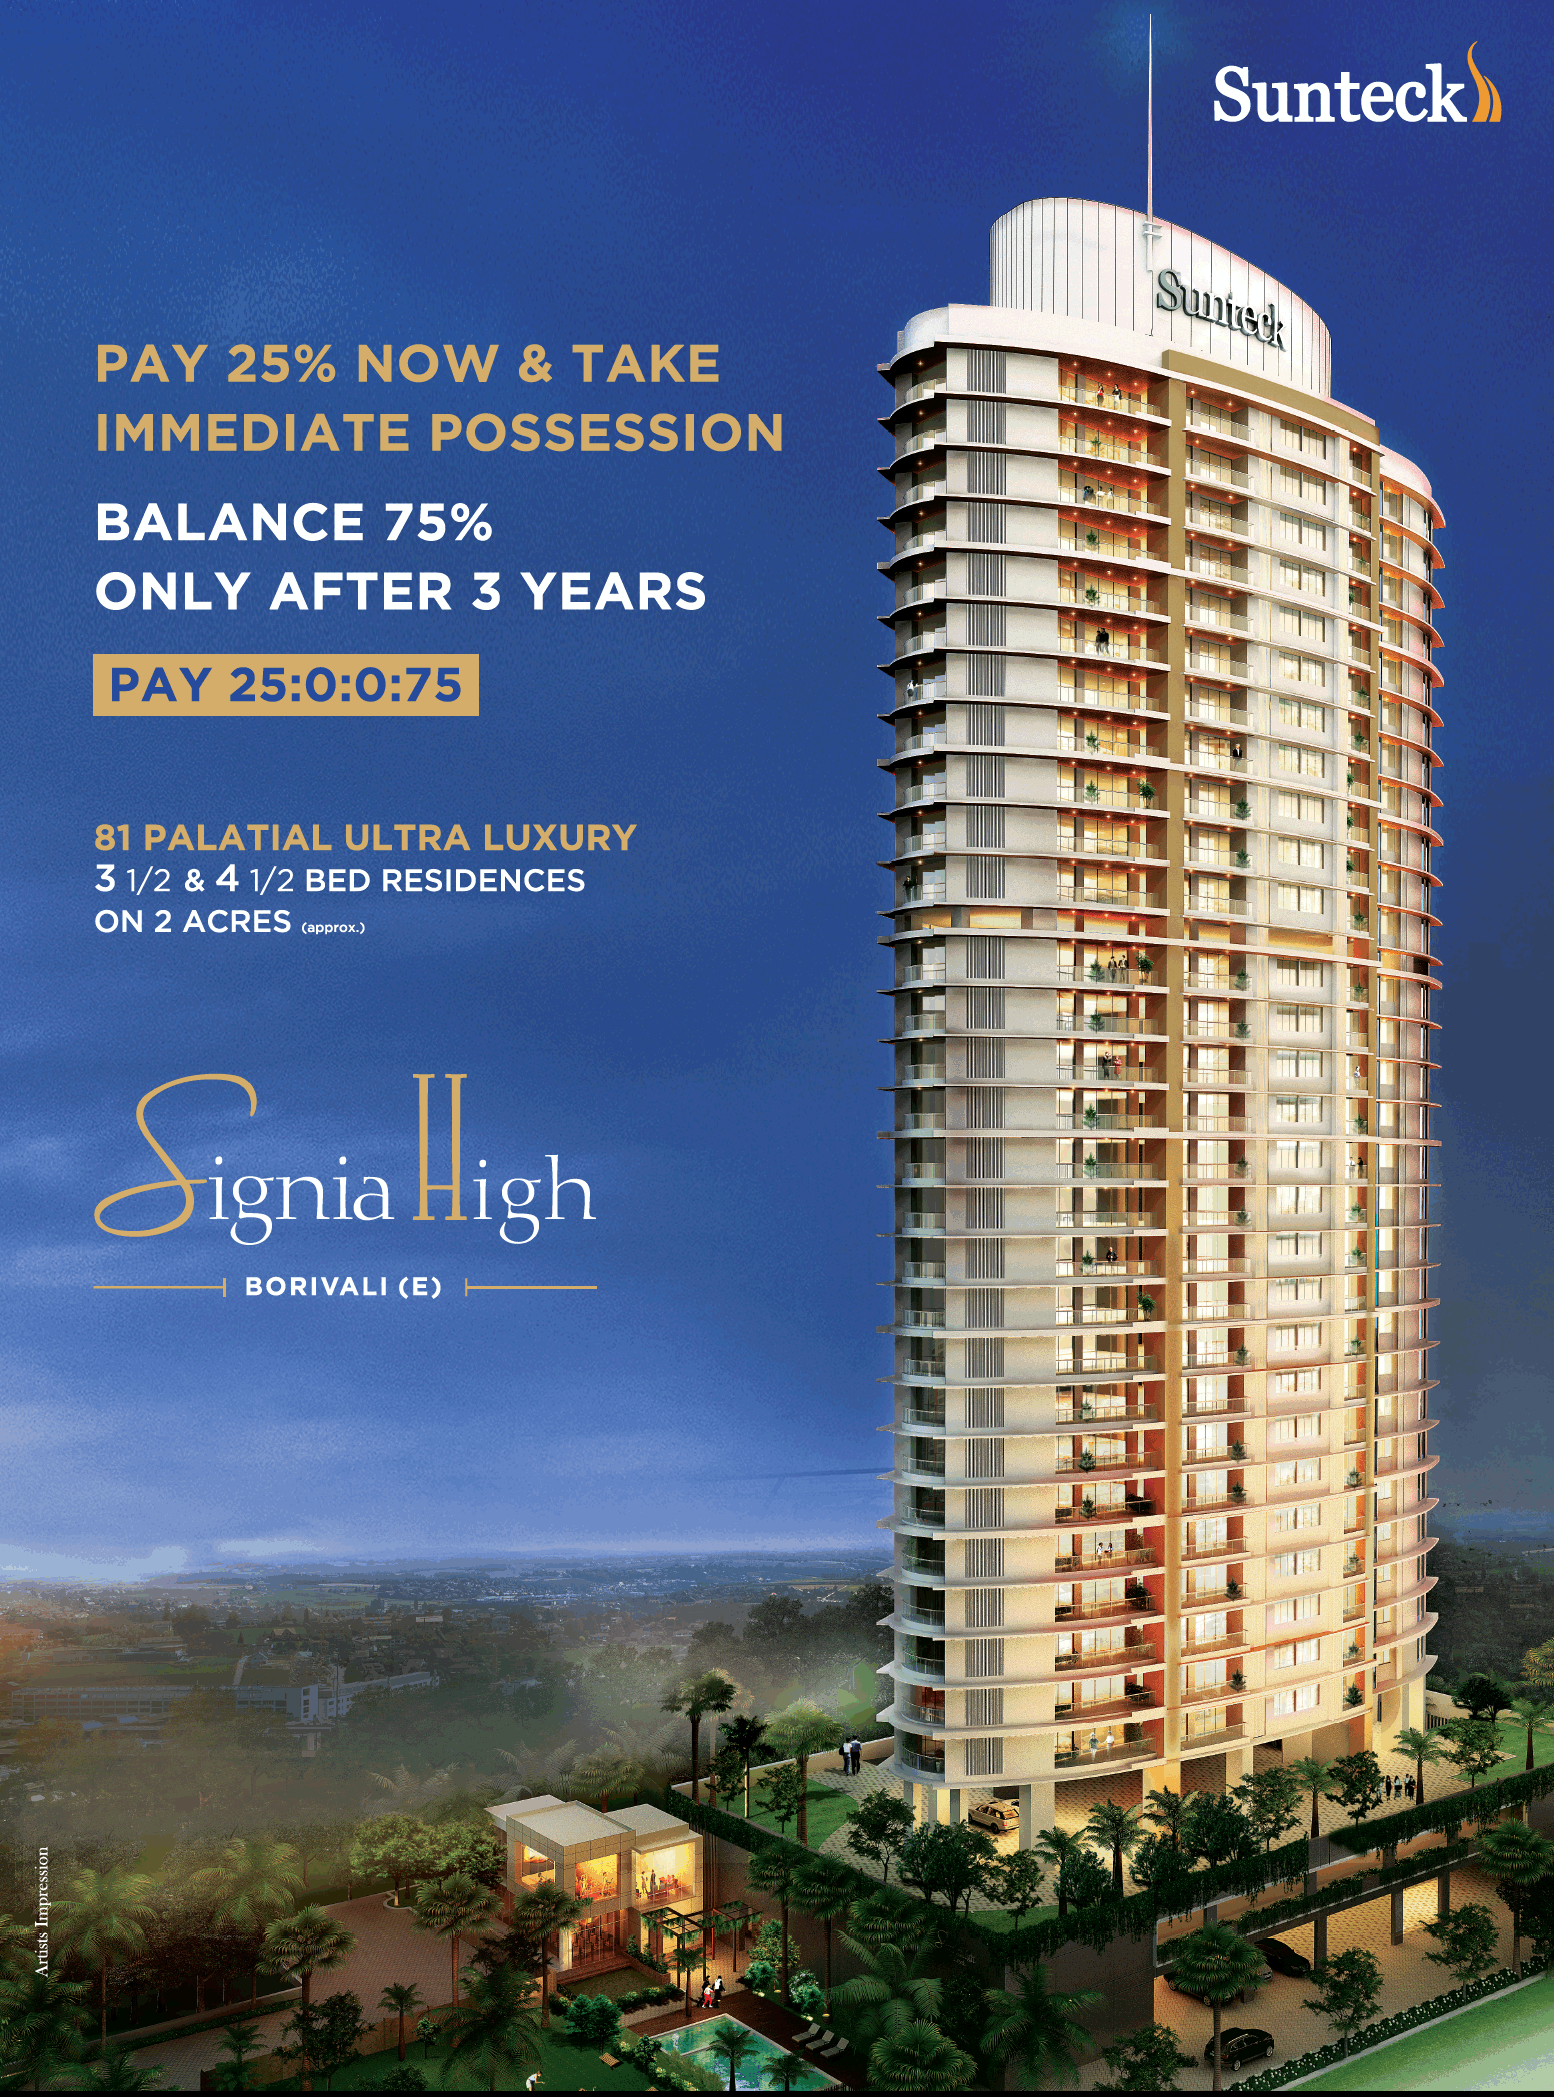 Pay 25% now & take immediate possession at Suntech Signia High in Mumbai